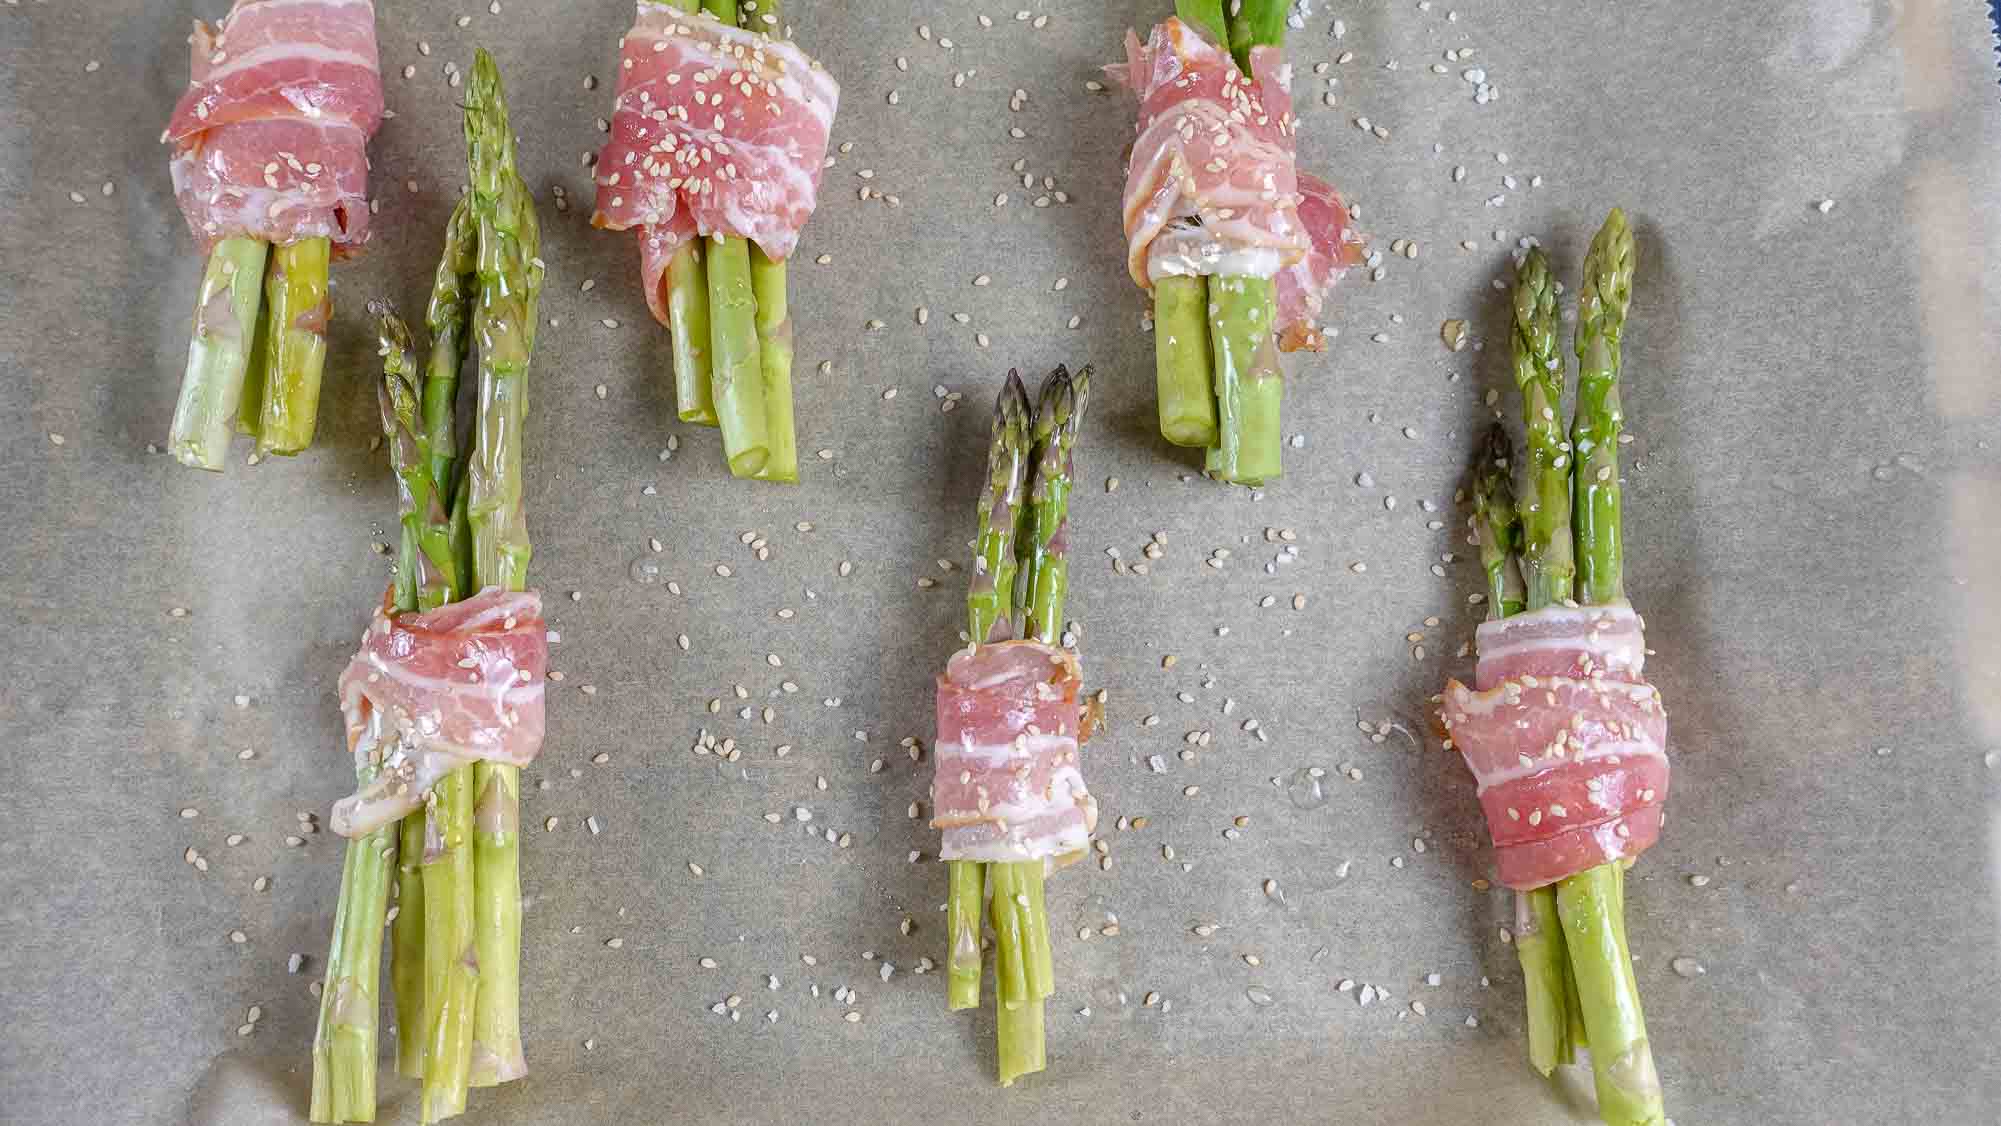 Bacon Wrapped Asparagus Recipe on a baking paper on a tray.